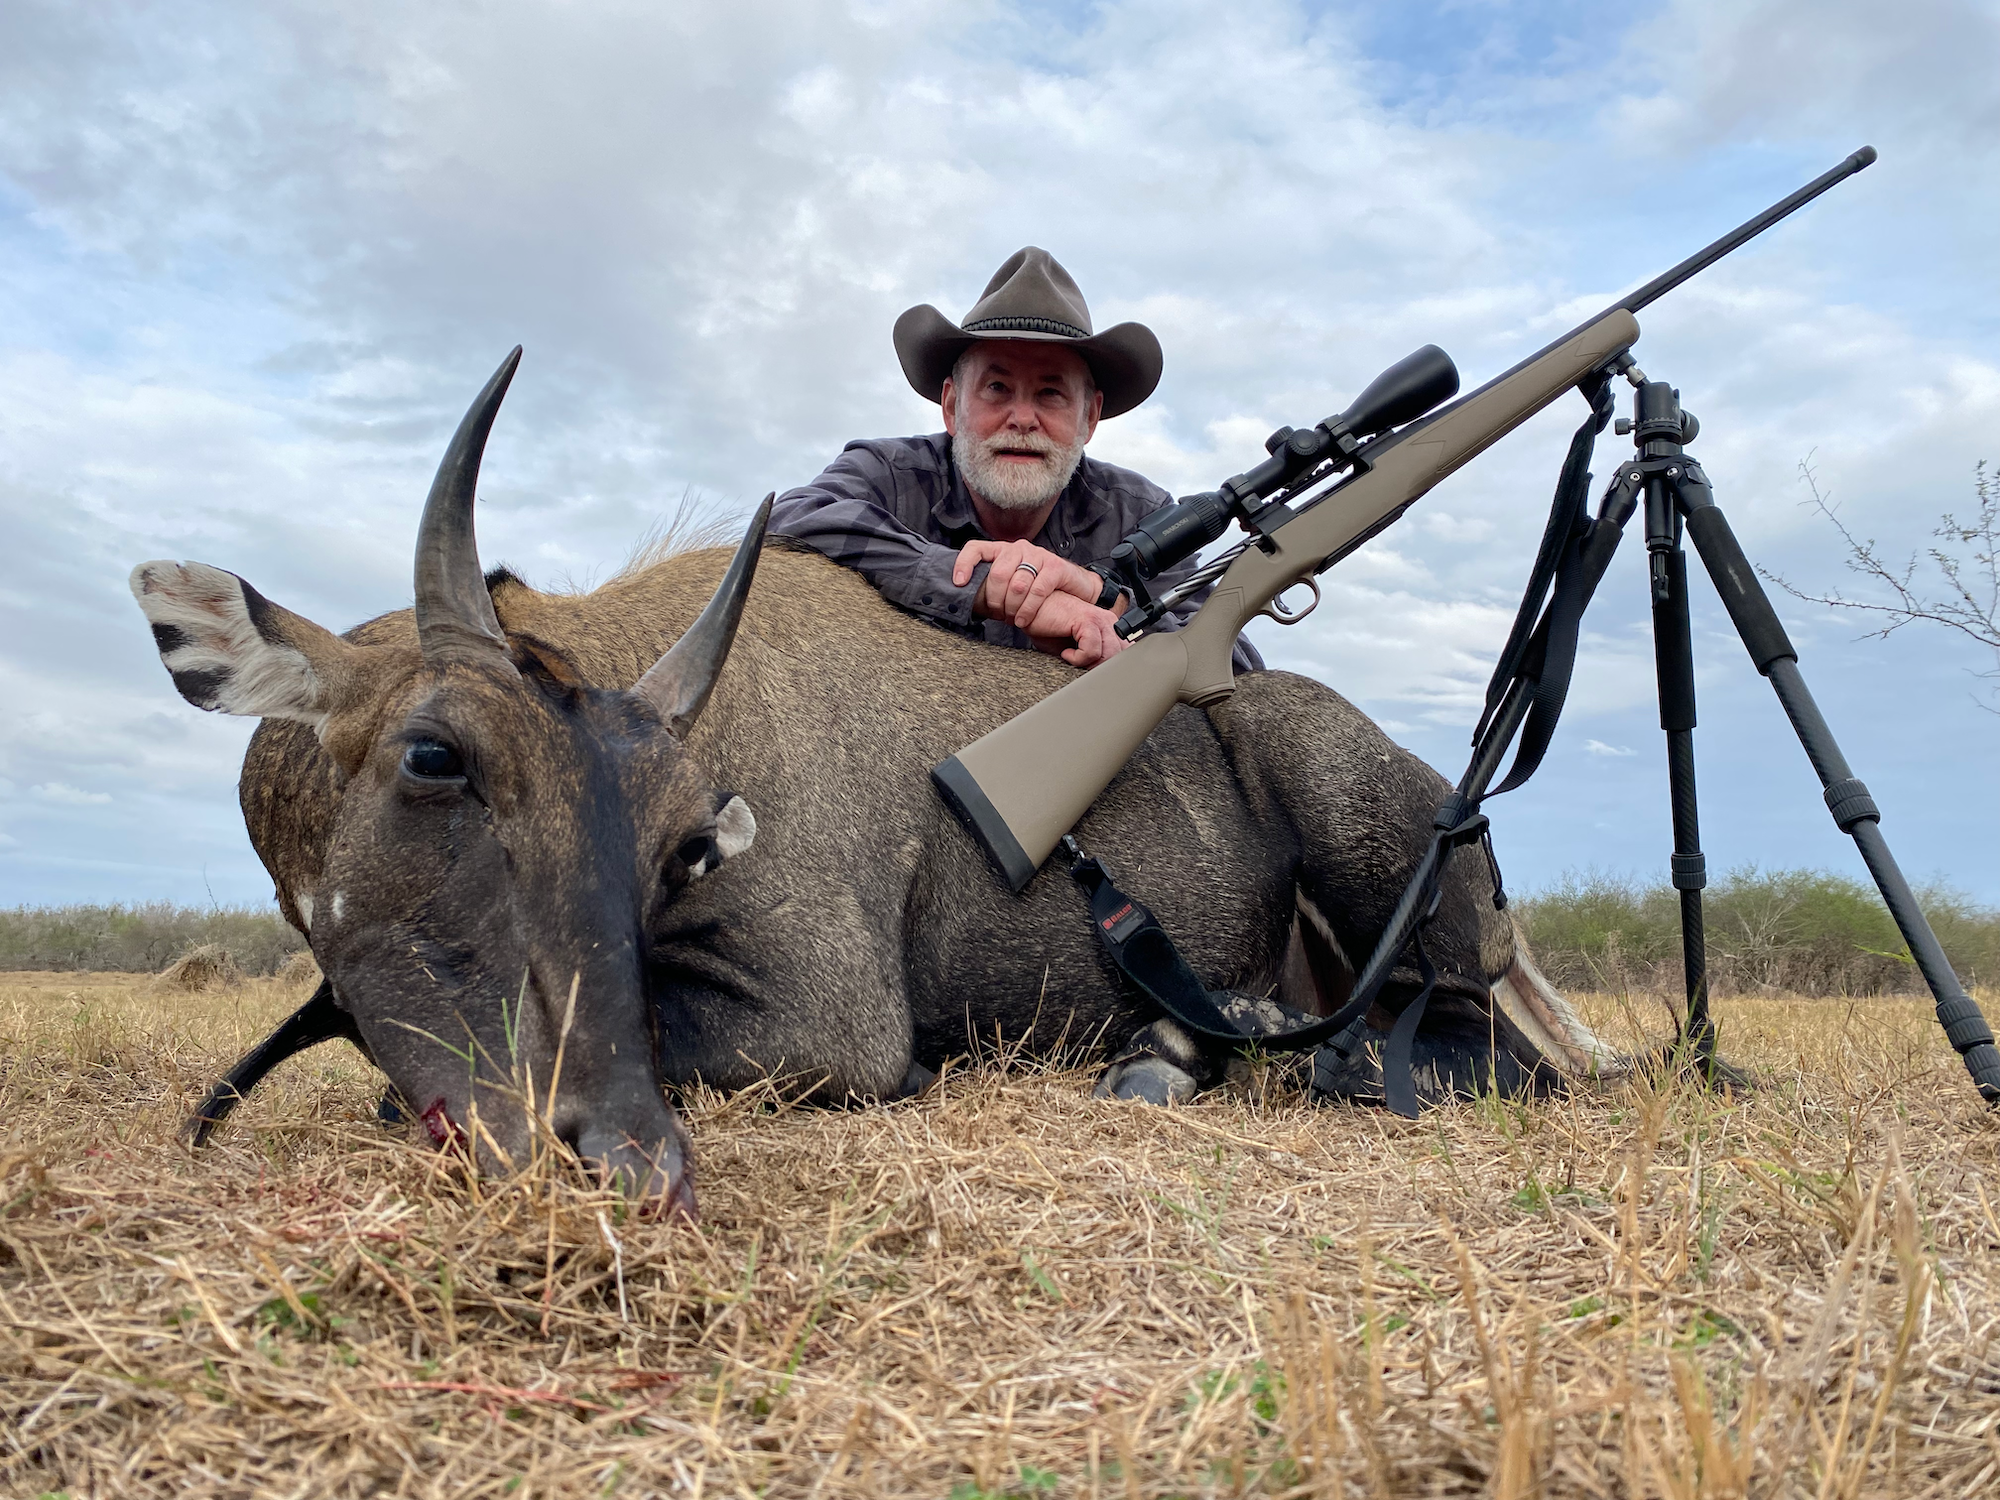 Hunter with Mossberg Patriot rifle next to dead nilgai